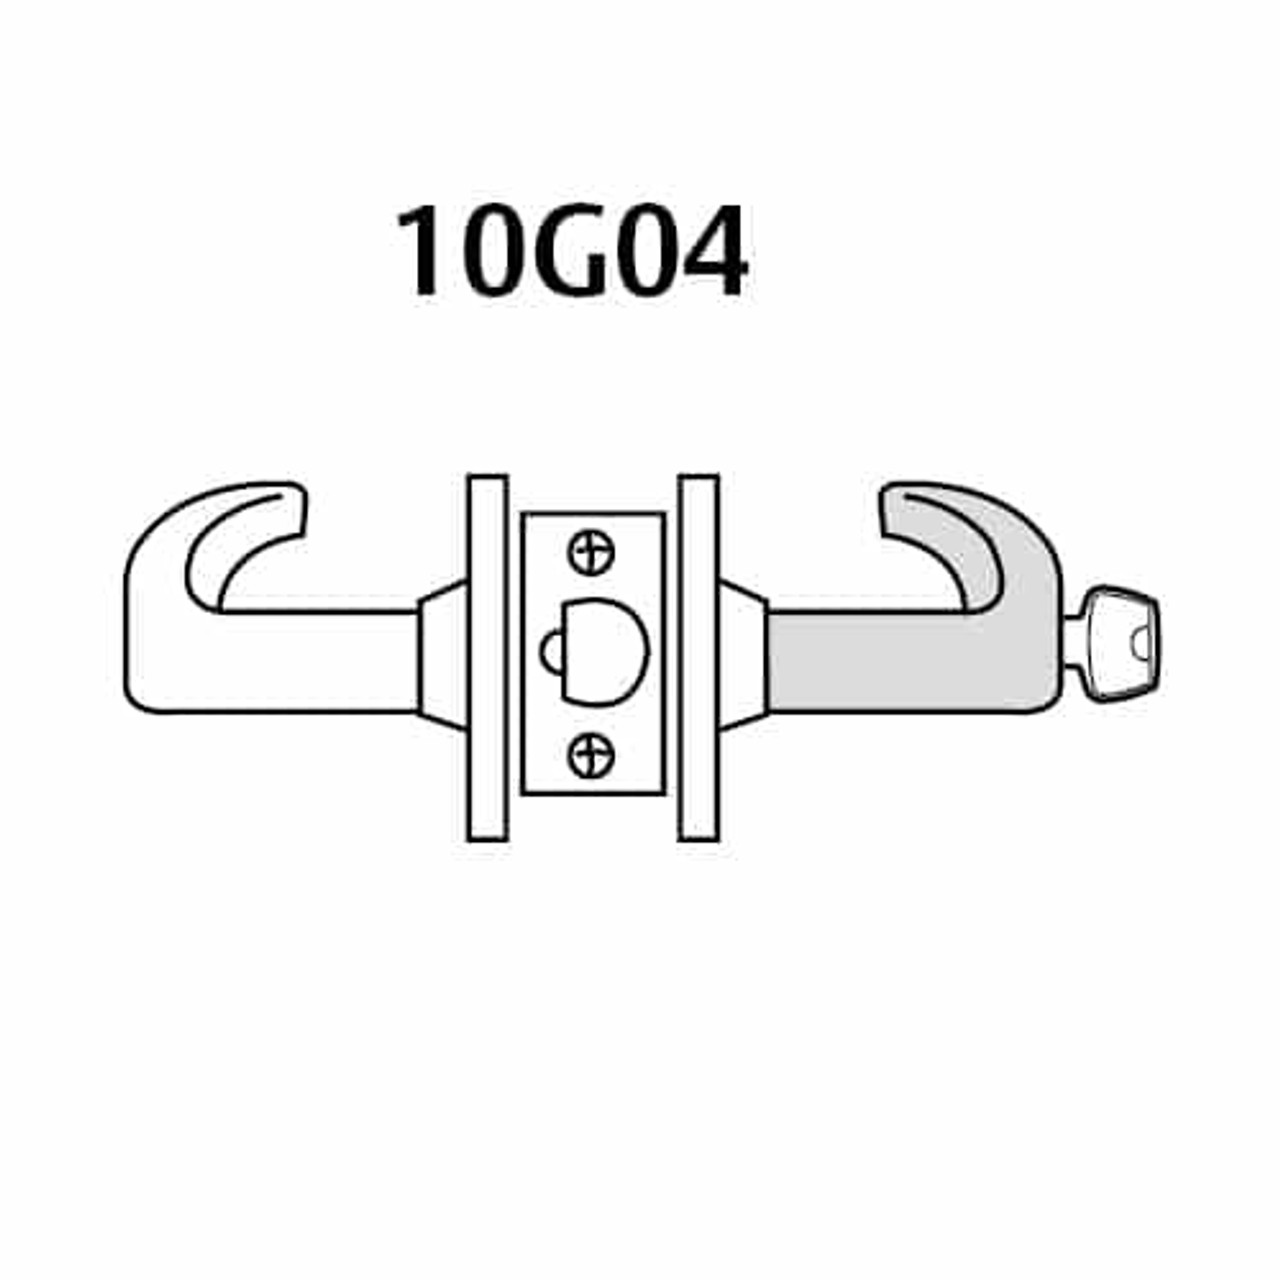 2870-10G04-LL-26 Sargent 10 Line Cylindrical Storeroom/Closet Locks with L Lever Design and L Rose Prepped for SFIC in Bright Chrome